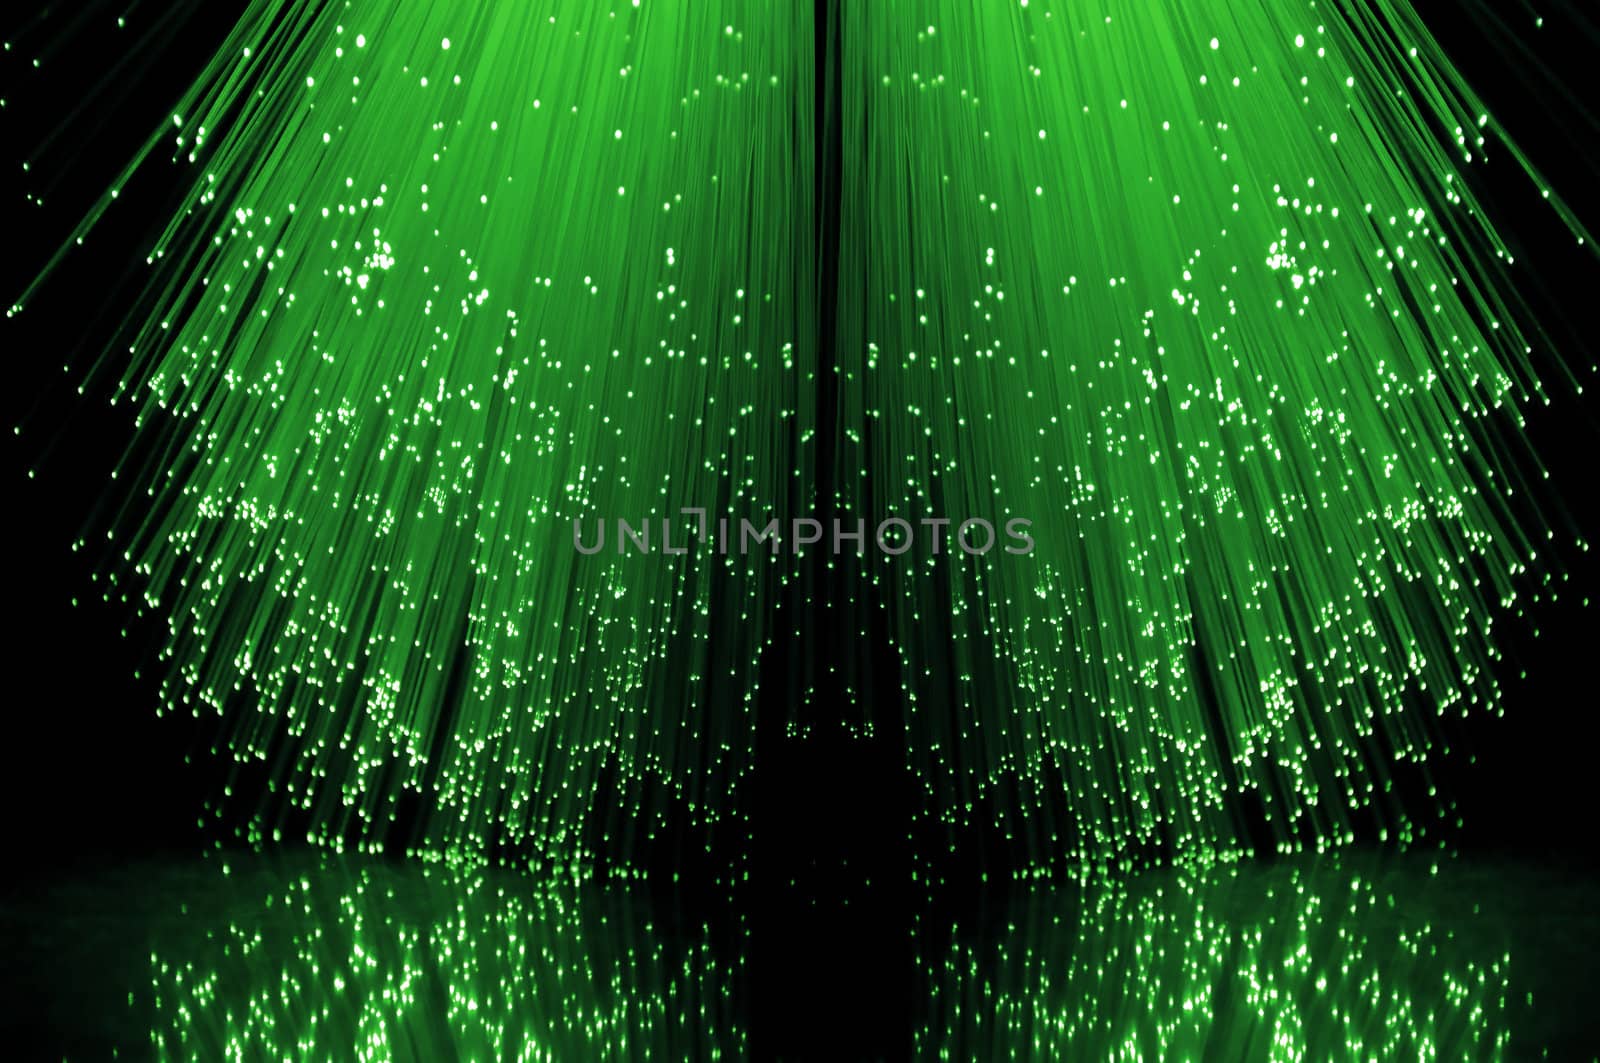 Low level angle capturing the ends of many illuminated green fibre optic light strands against a black background in reflecting into the foreground.